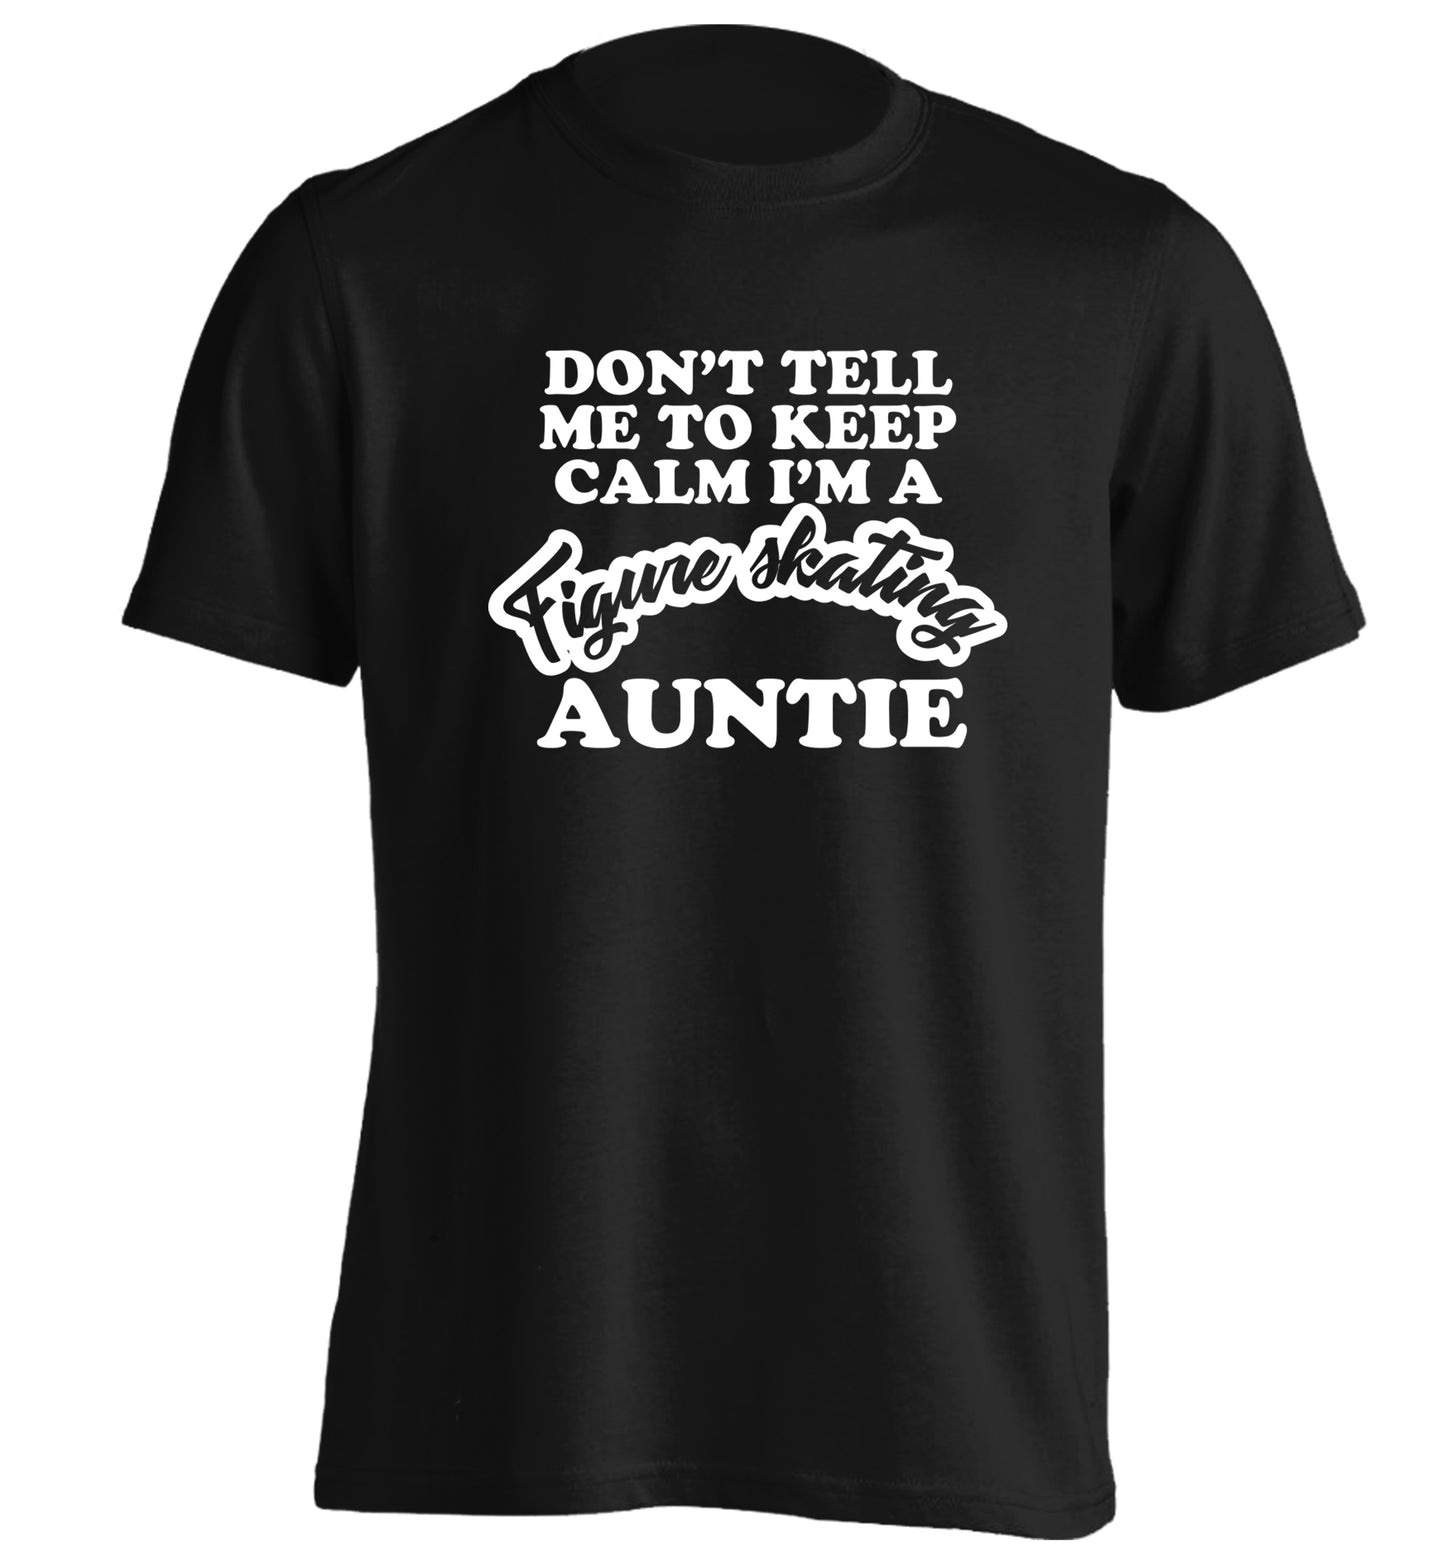 Don't tell me to keep calm I'm a figure skating auntie adults unisexblack Tshirt 2XL